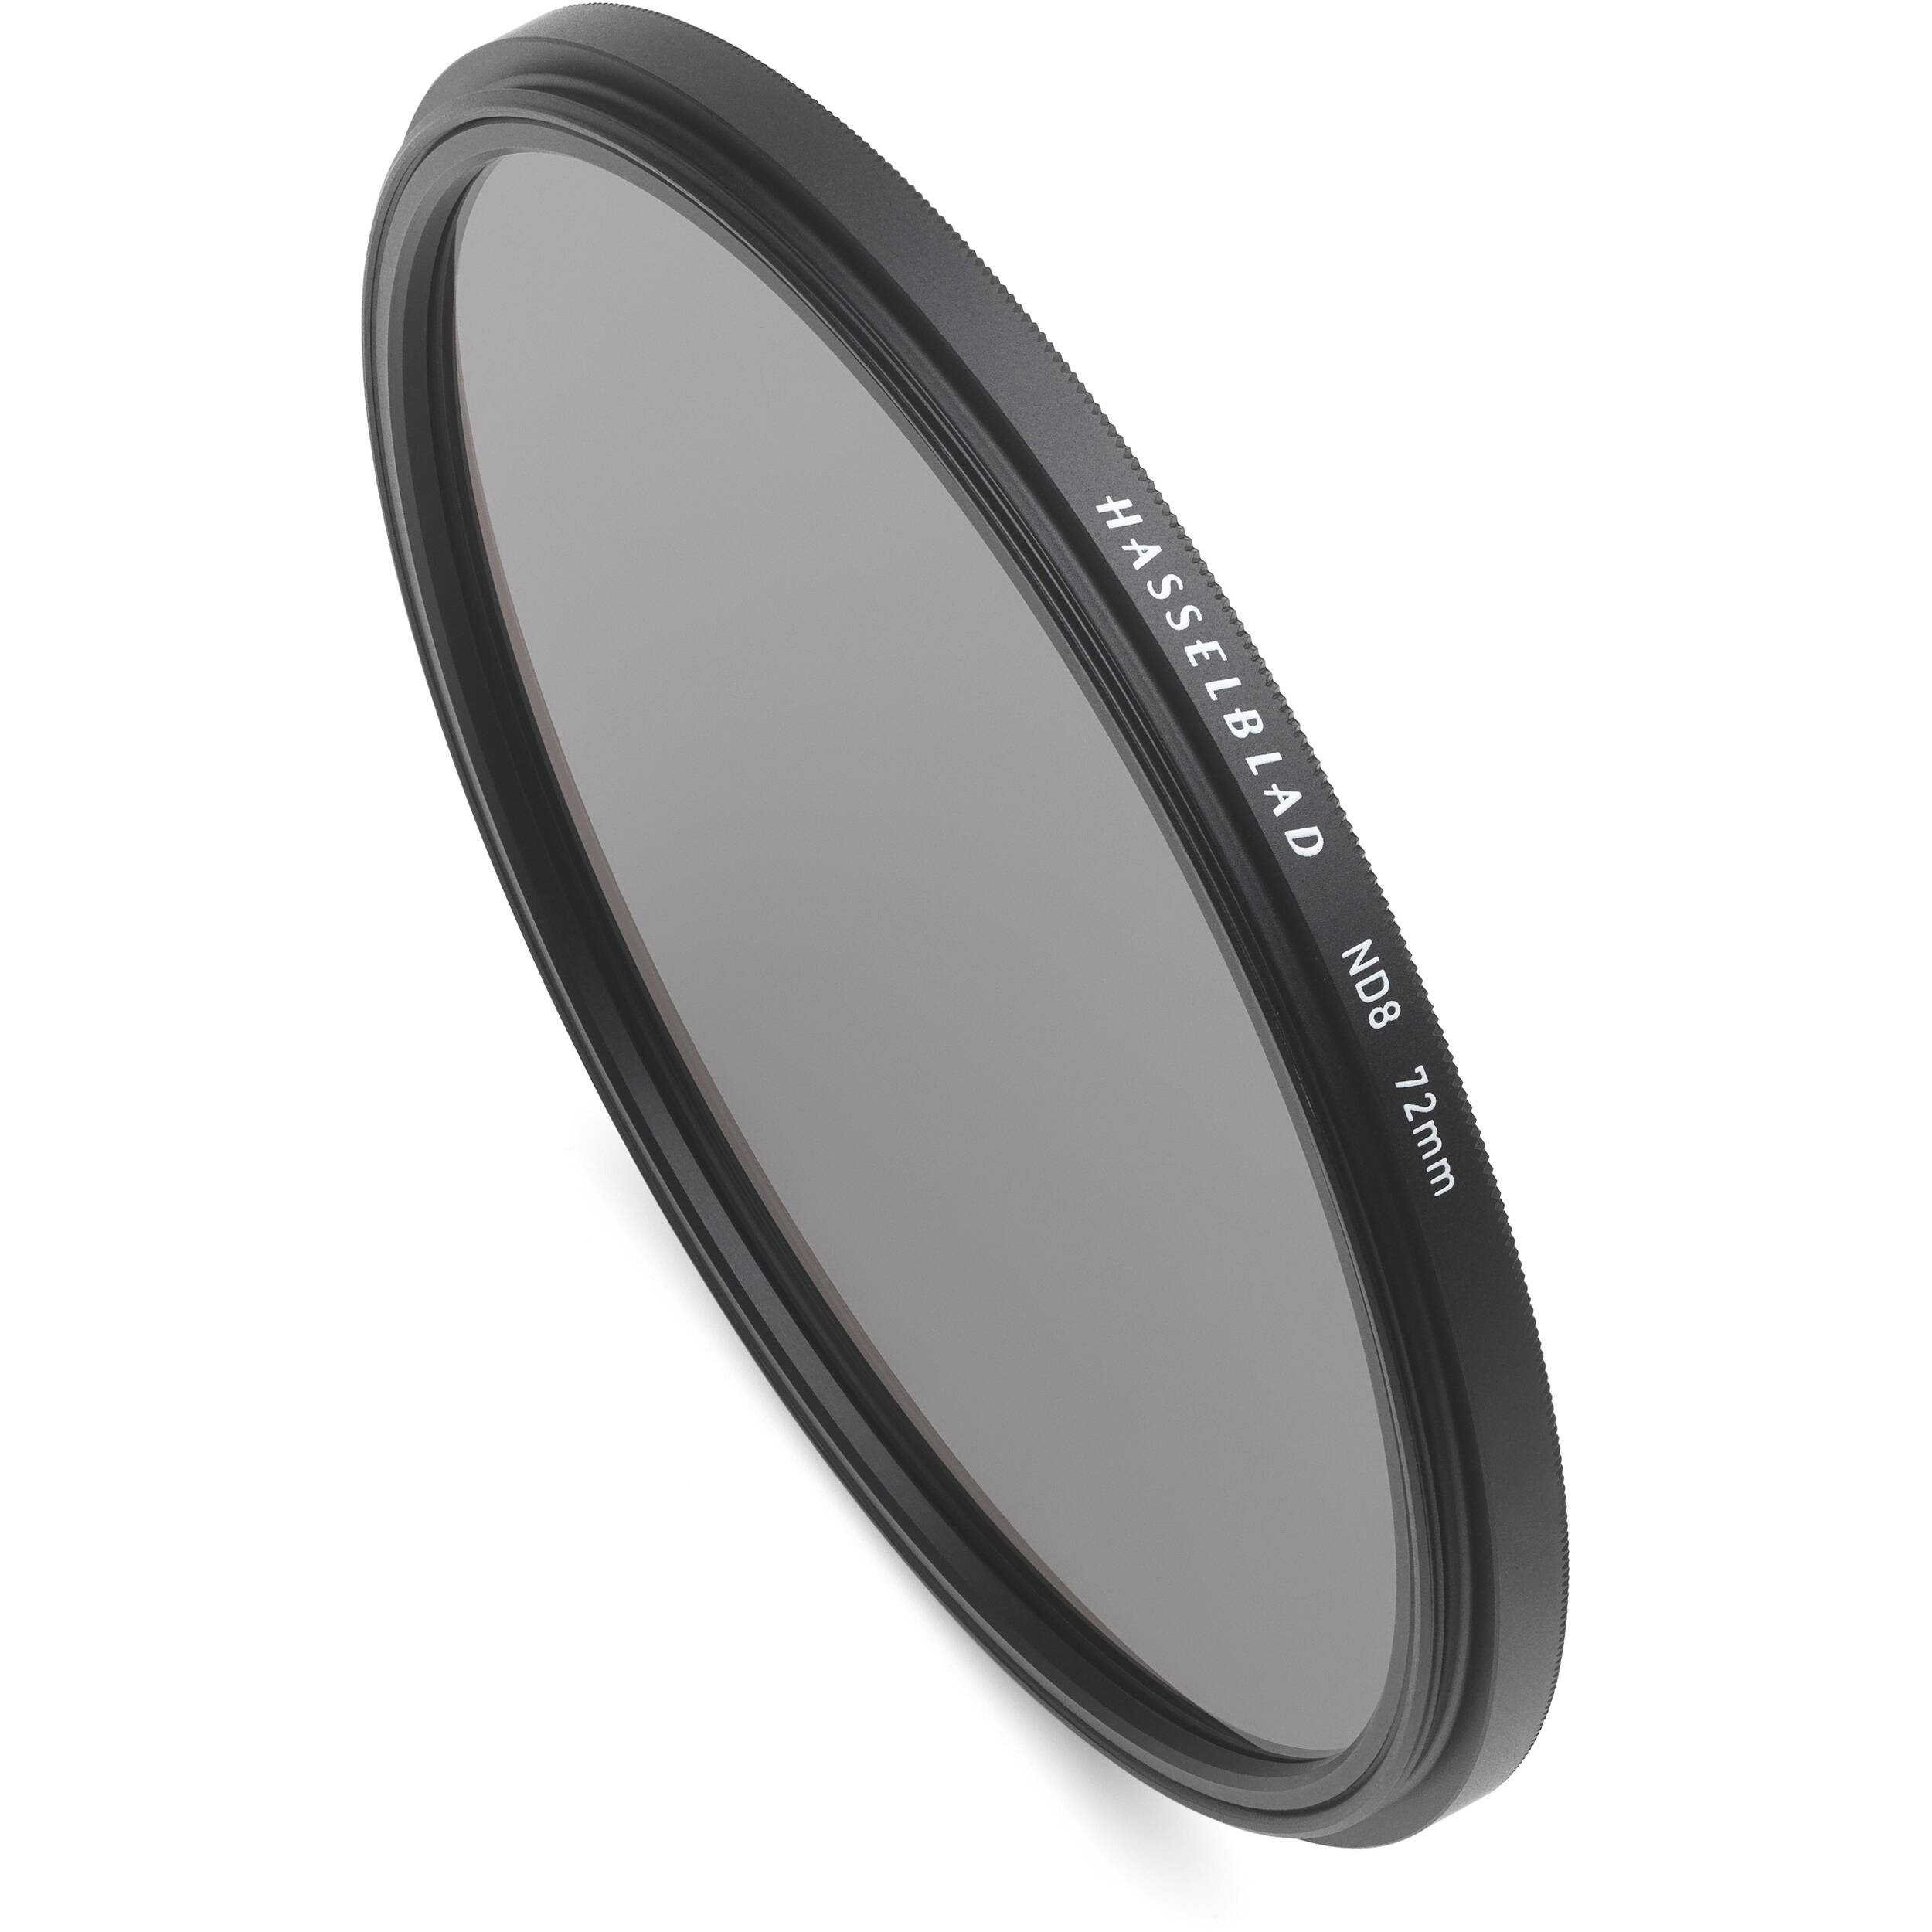 Hasselblad ND8 Filter (72mm)